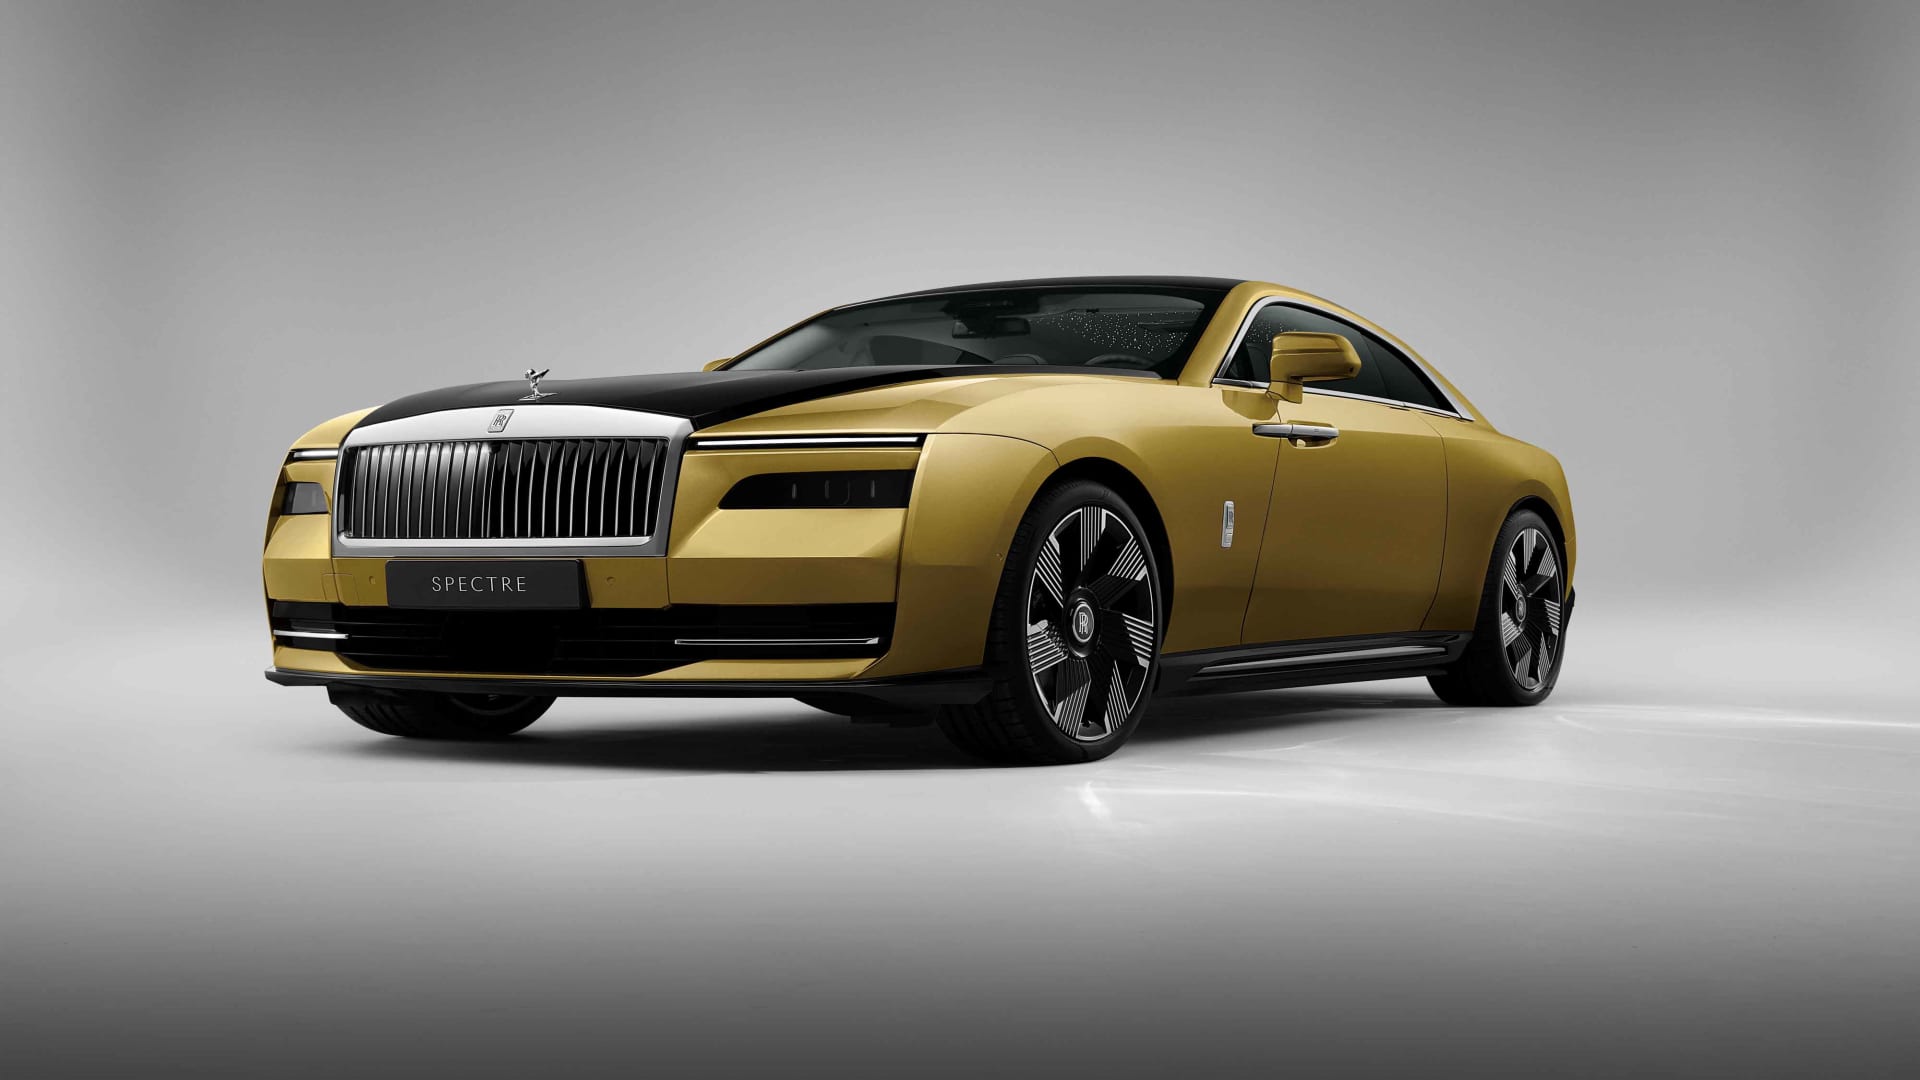 Rolls-Royce has over 300 orders for its $413,000 Spectre electric vehicle